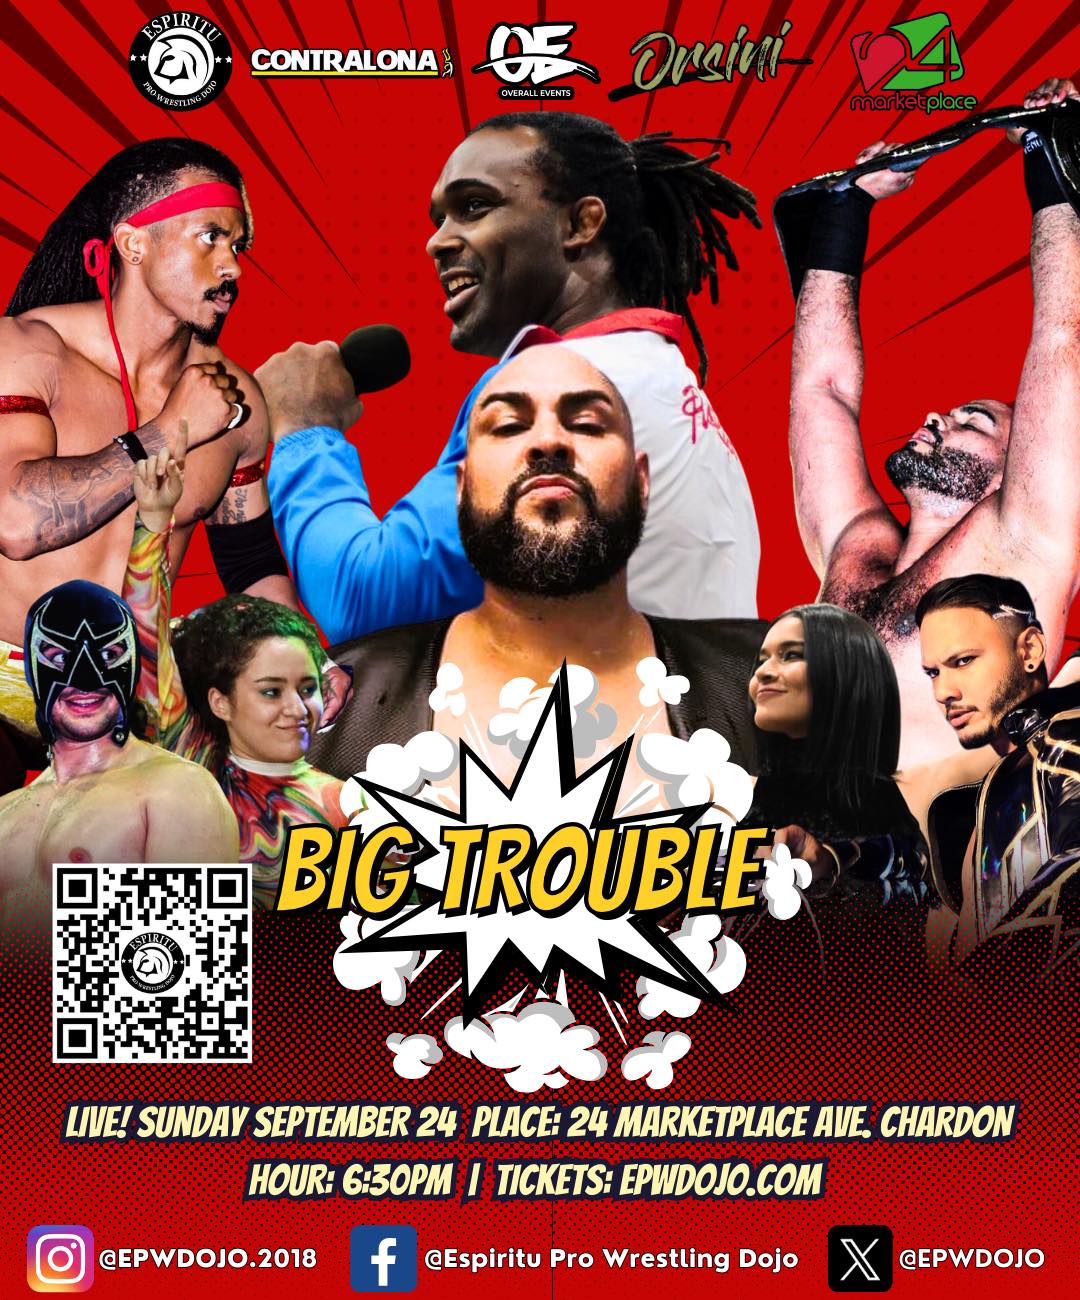 May be an image of 6 people and text that says 'ESPIRITU ත Qwe CONTRALONA OVERALL O6 ELLEVETS Oraini BIG TROUBLE LIVE! SUNDAY SEPTEMBER 24 PLACE: 24 MARKETPLACE AVE. CHARDON HOUR: 6:30PM I TICKETS: EPWDOJO.COM @EPWDOJO.2018 f @Espiritu Pro Wrestling Dojo @EPWDOJO'